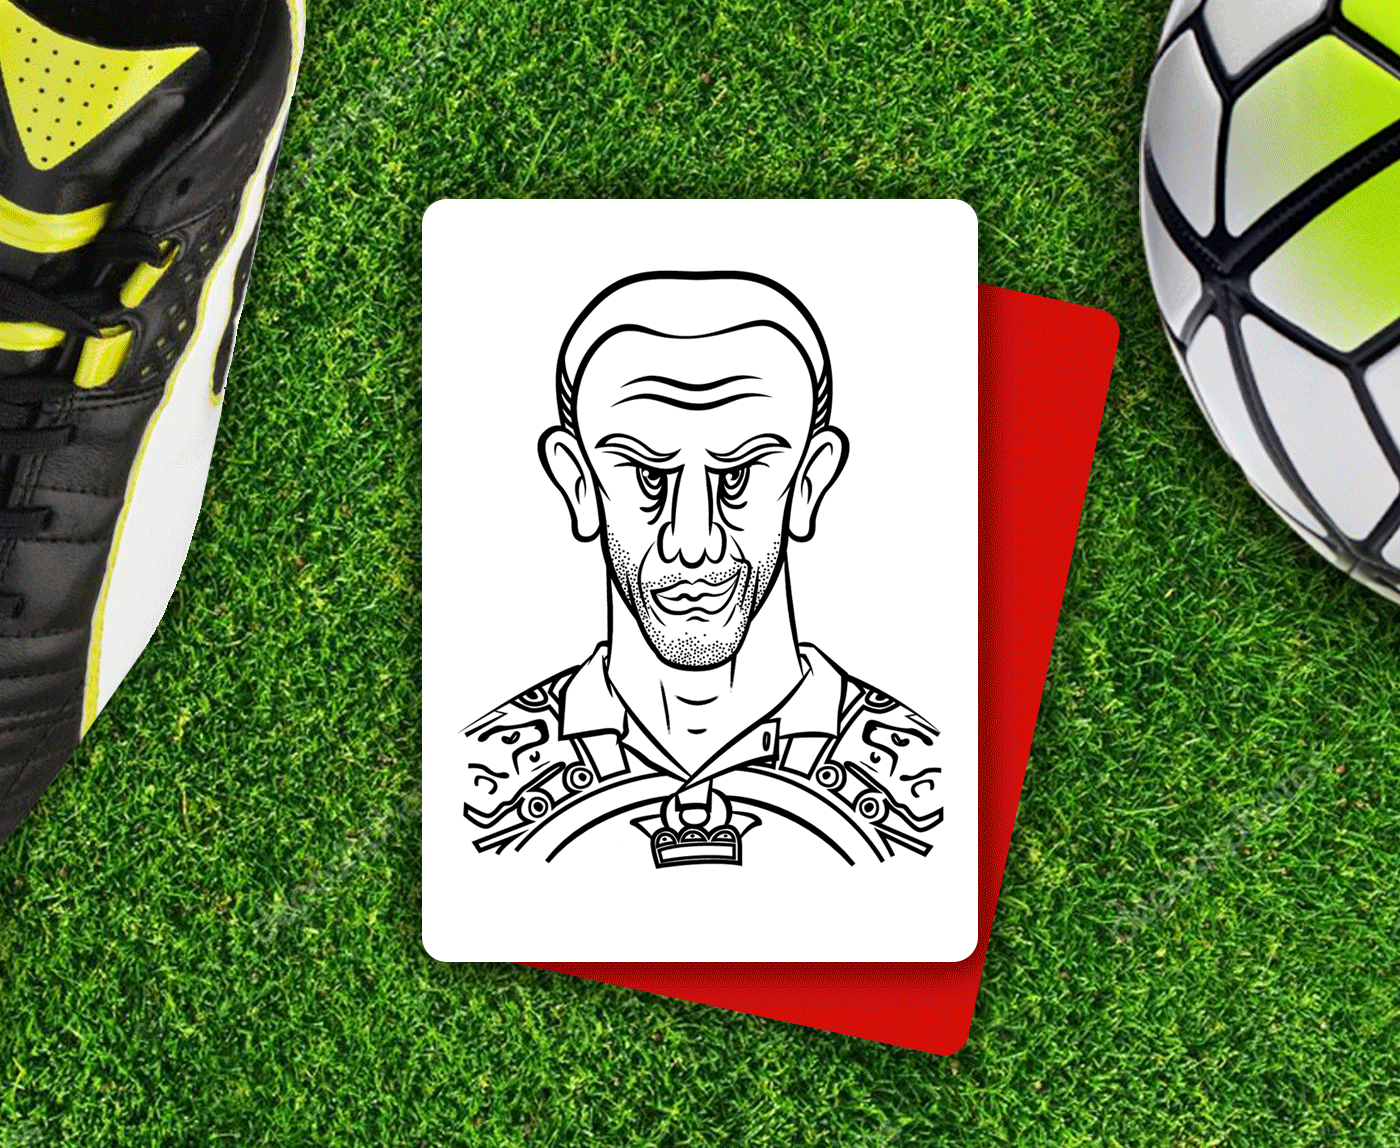 ILLUSTRATION  Zague mexico soccer soccerplayer digitalart characterdesign Mexican cardgame deck